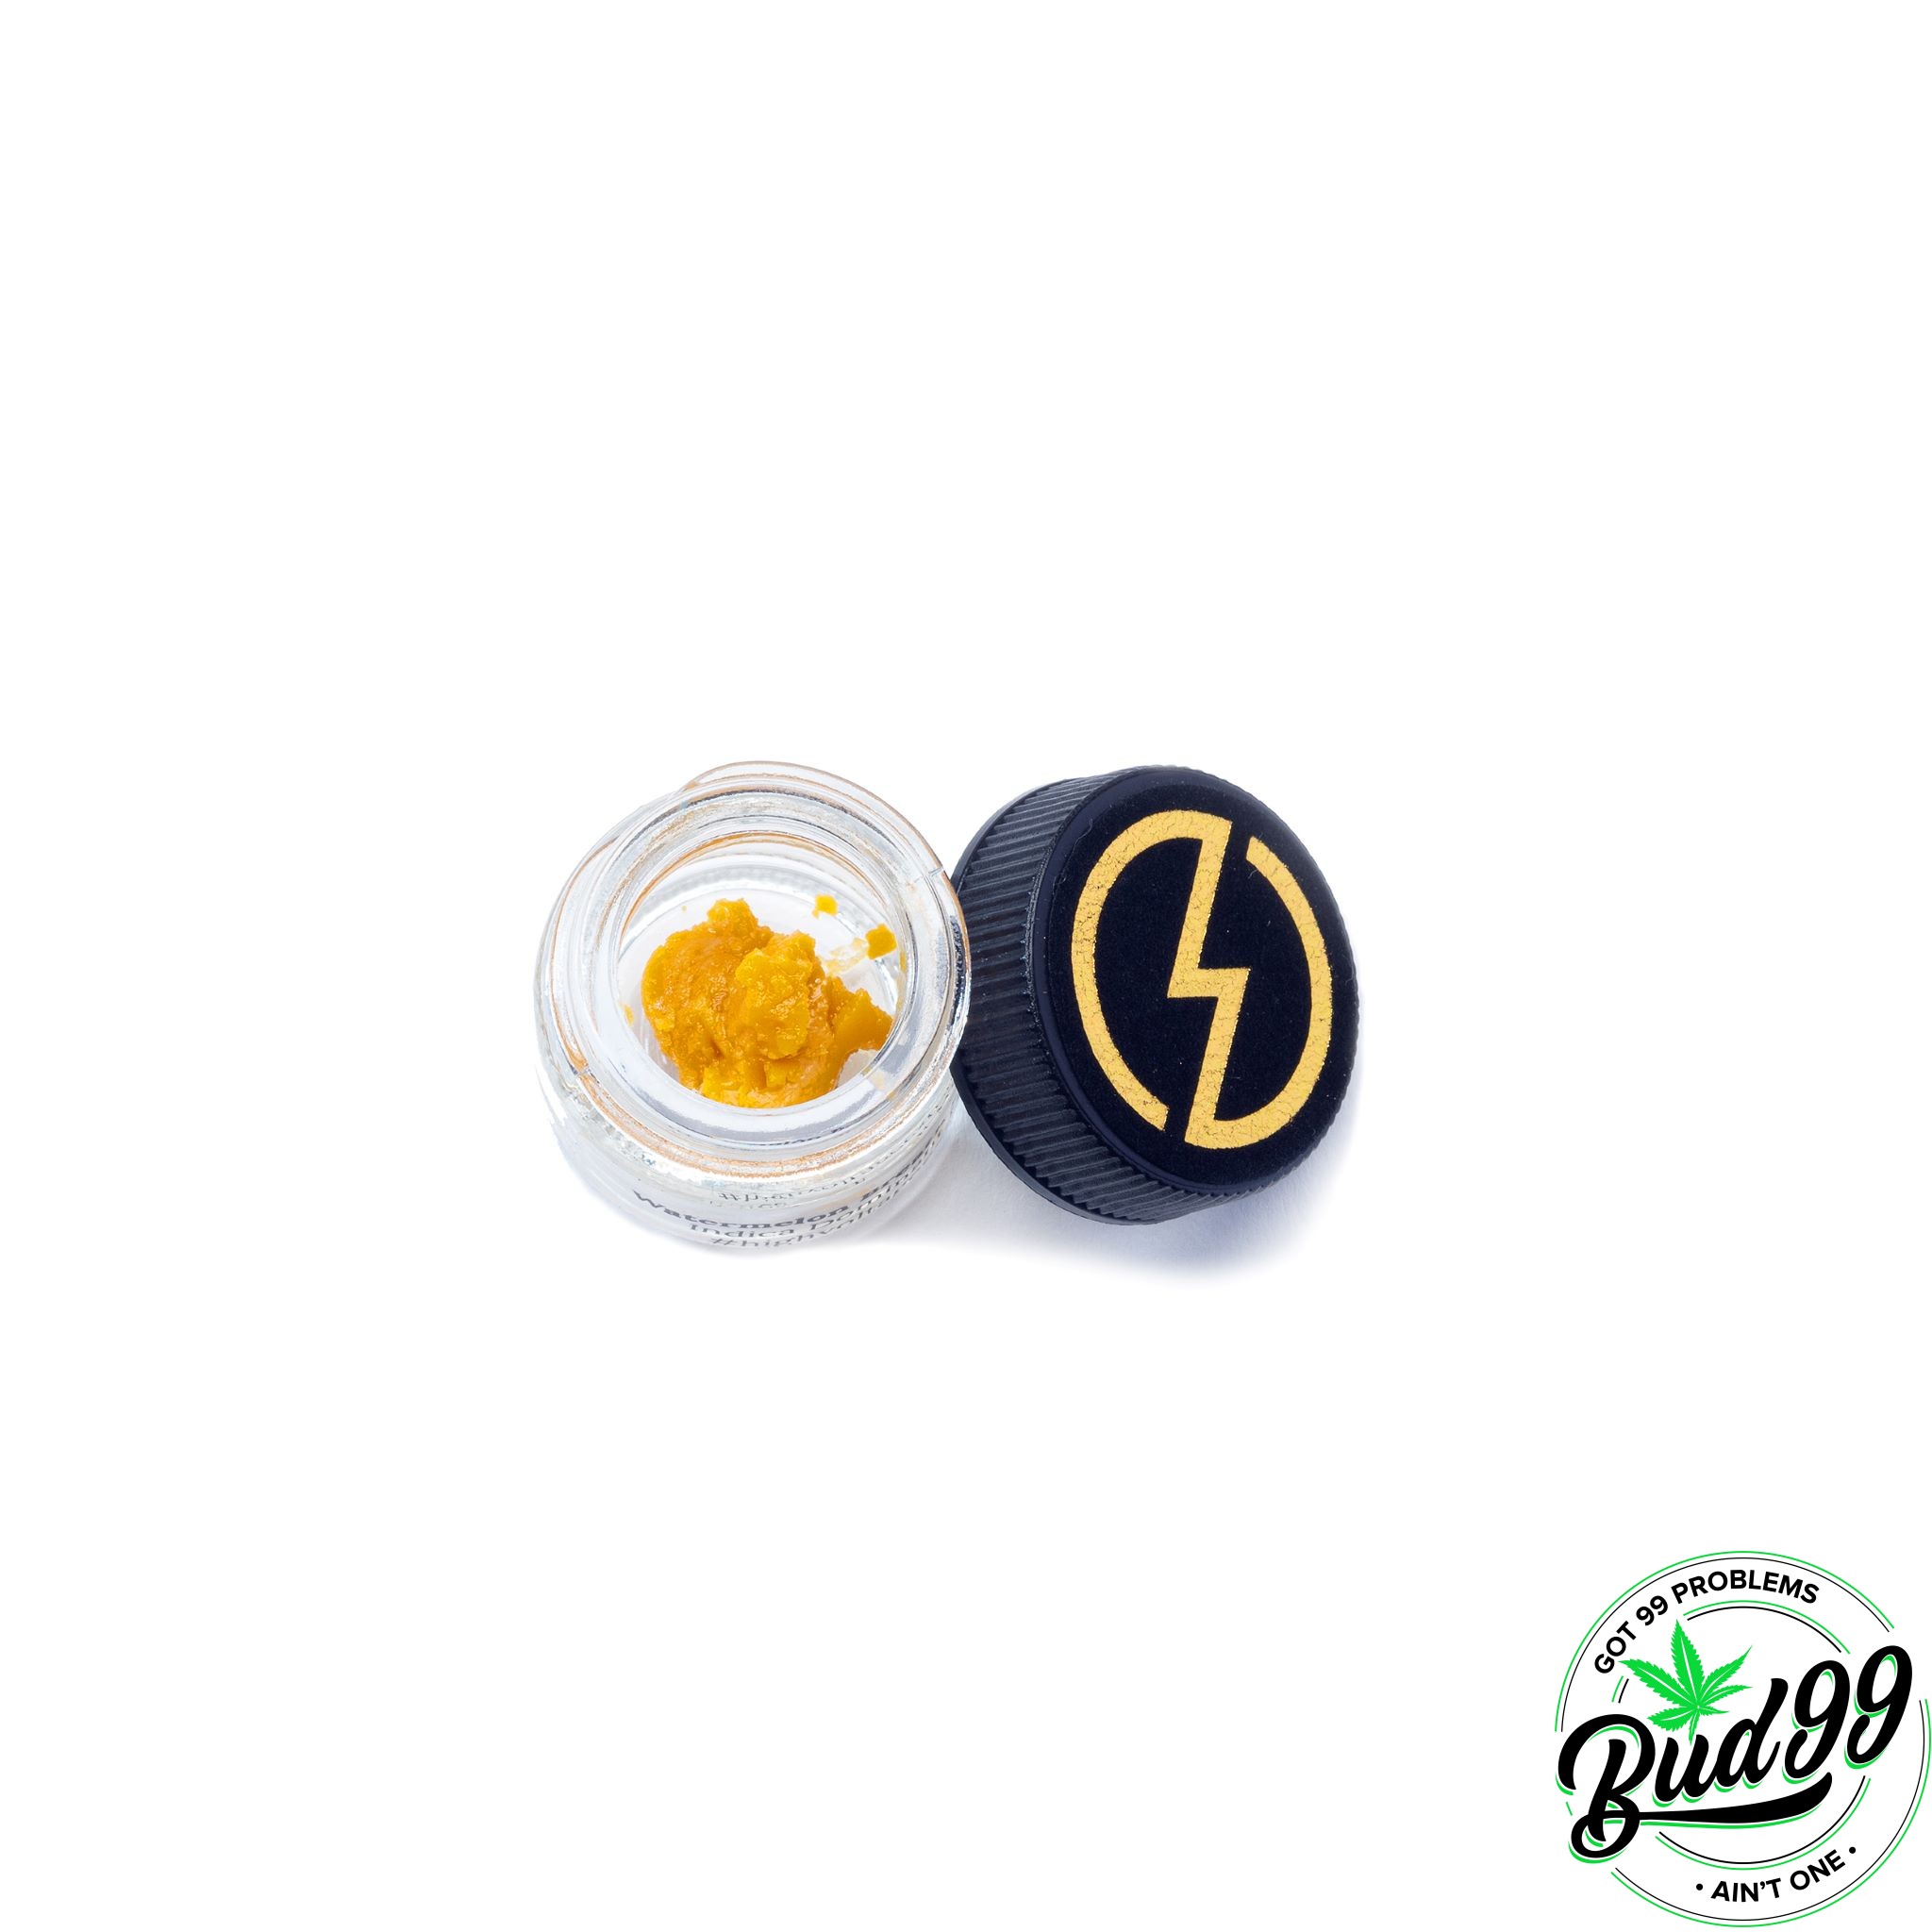 Buy Cannabis Concentrates Online